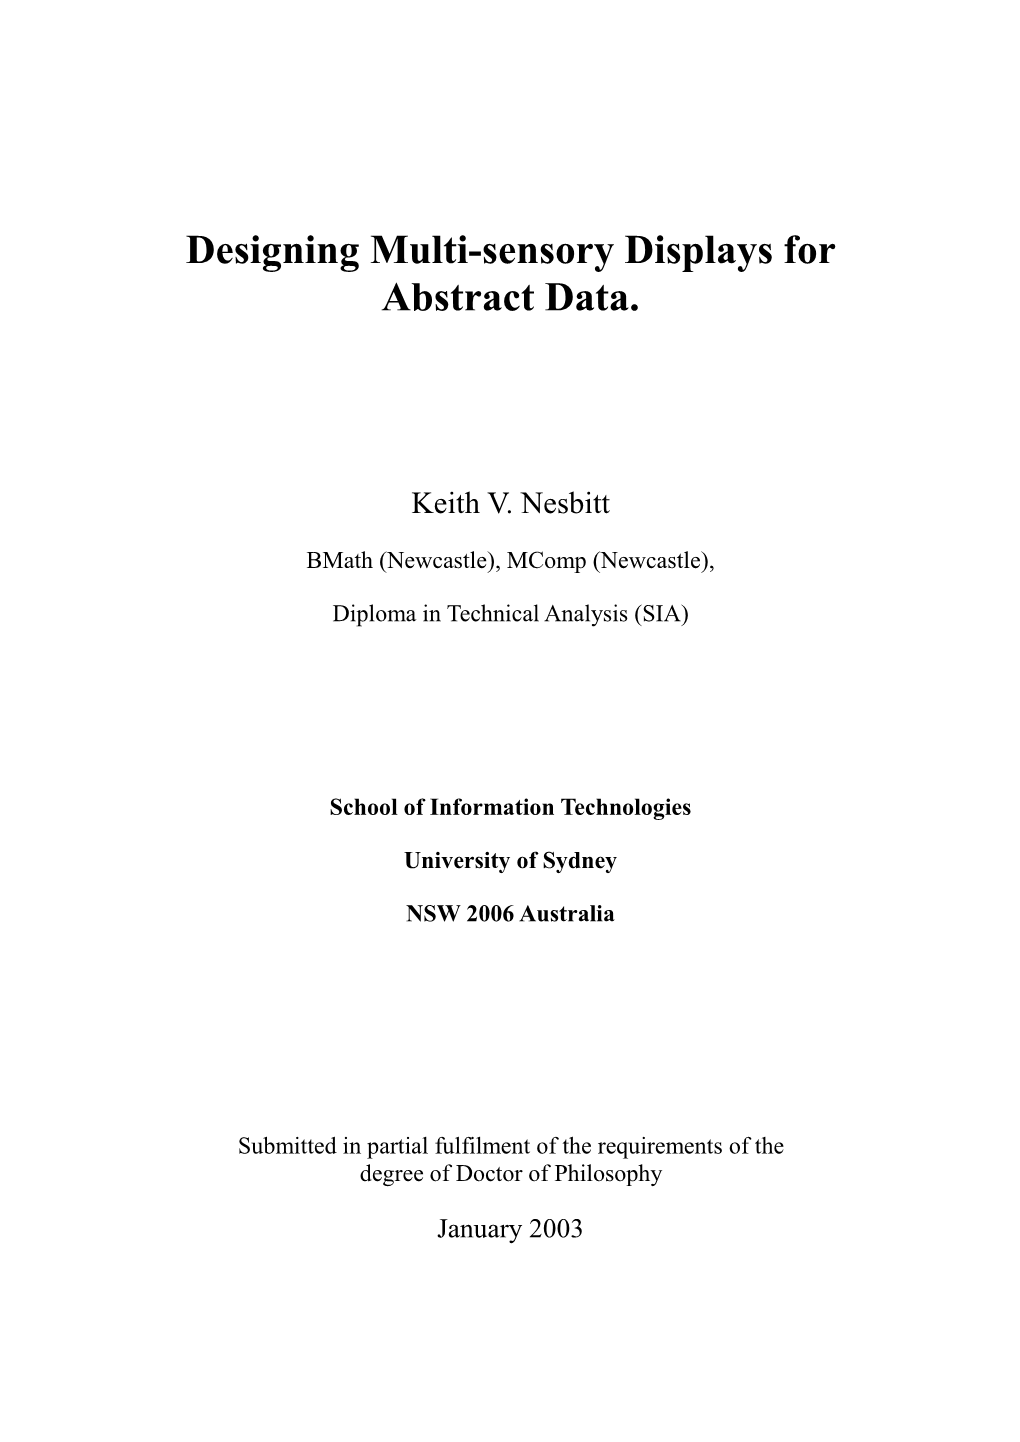 Designing Multi-Sensory Displays for Abstract Data